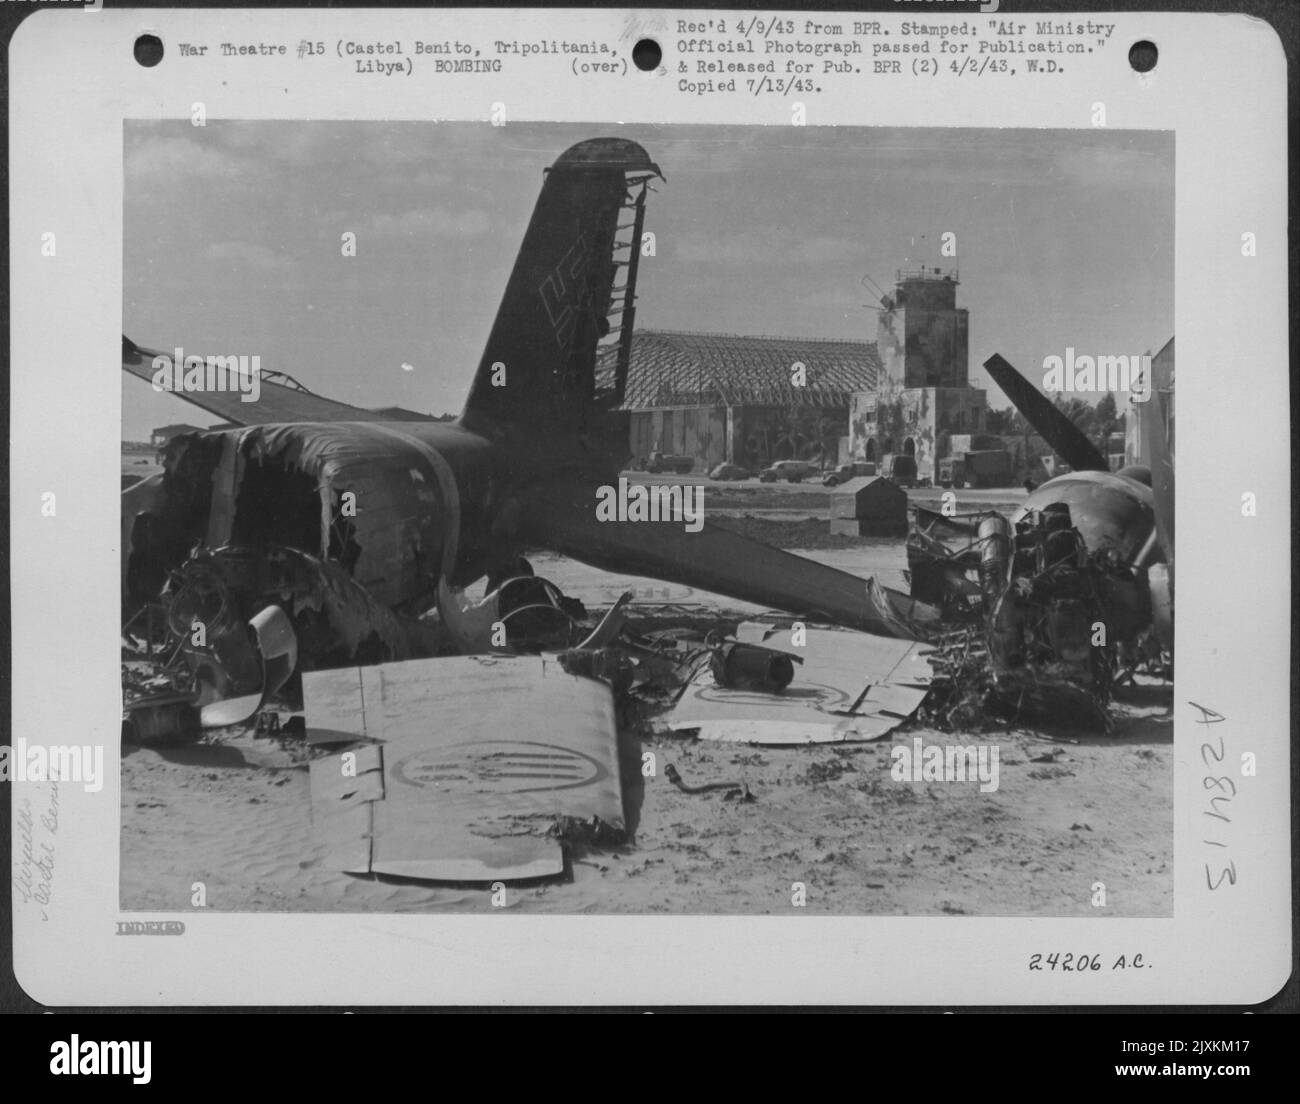 Smashed Nazi aircraft at the edge of the landing ground at Castel Benito, Tripolitania, Libya. Behind is the watch tower and the roofless hangars which were targets for Allied bombers. Stock Photo